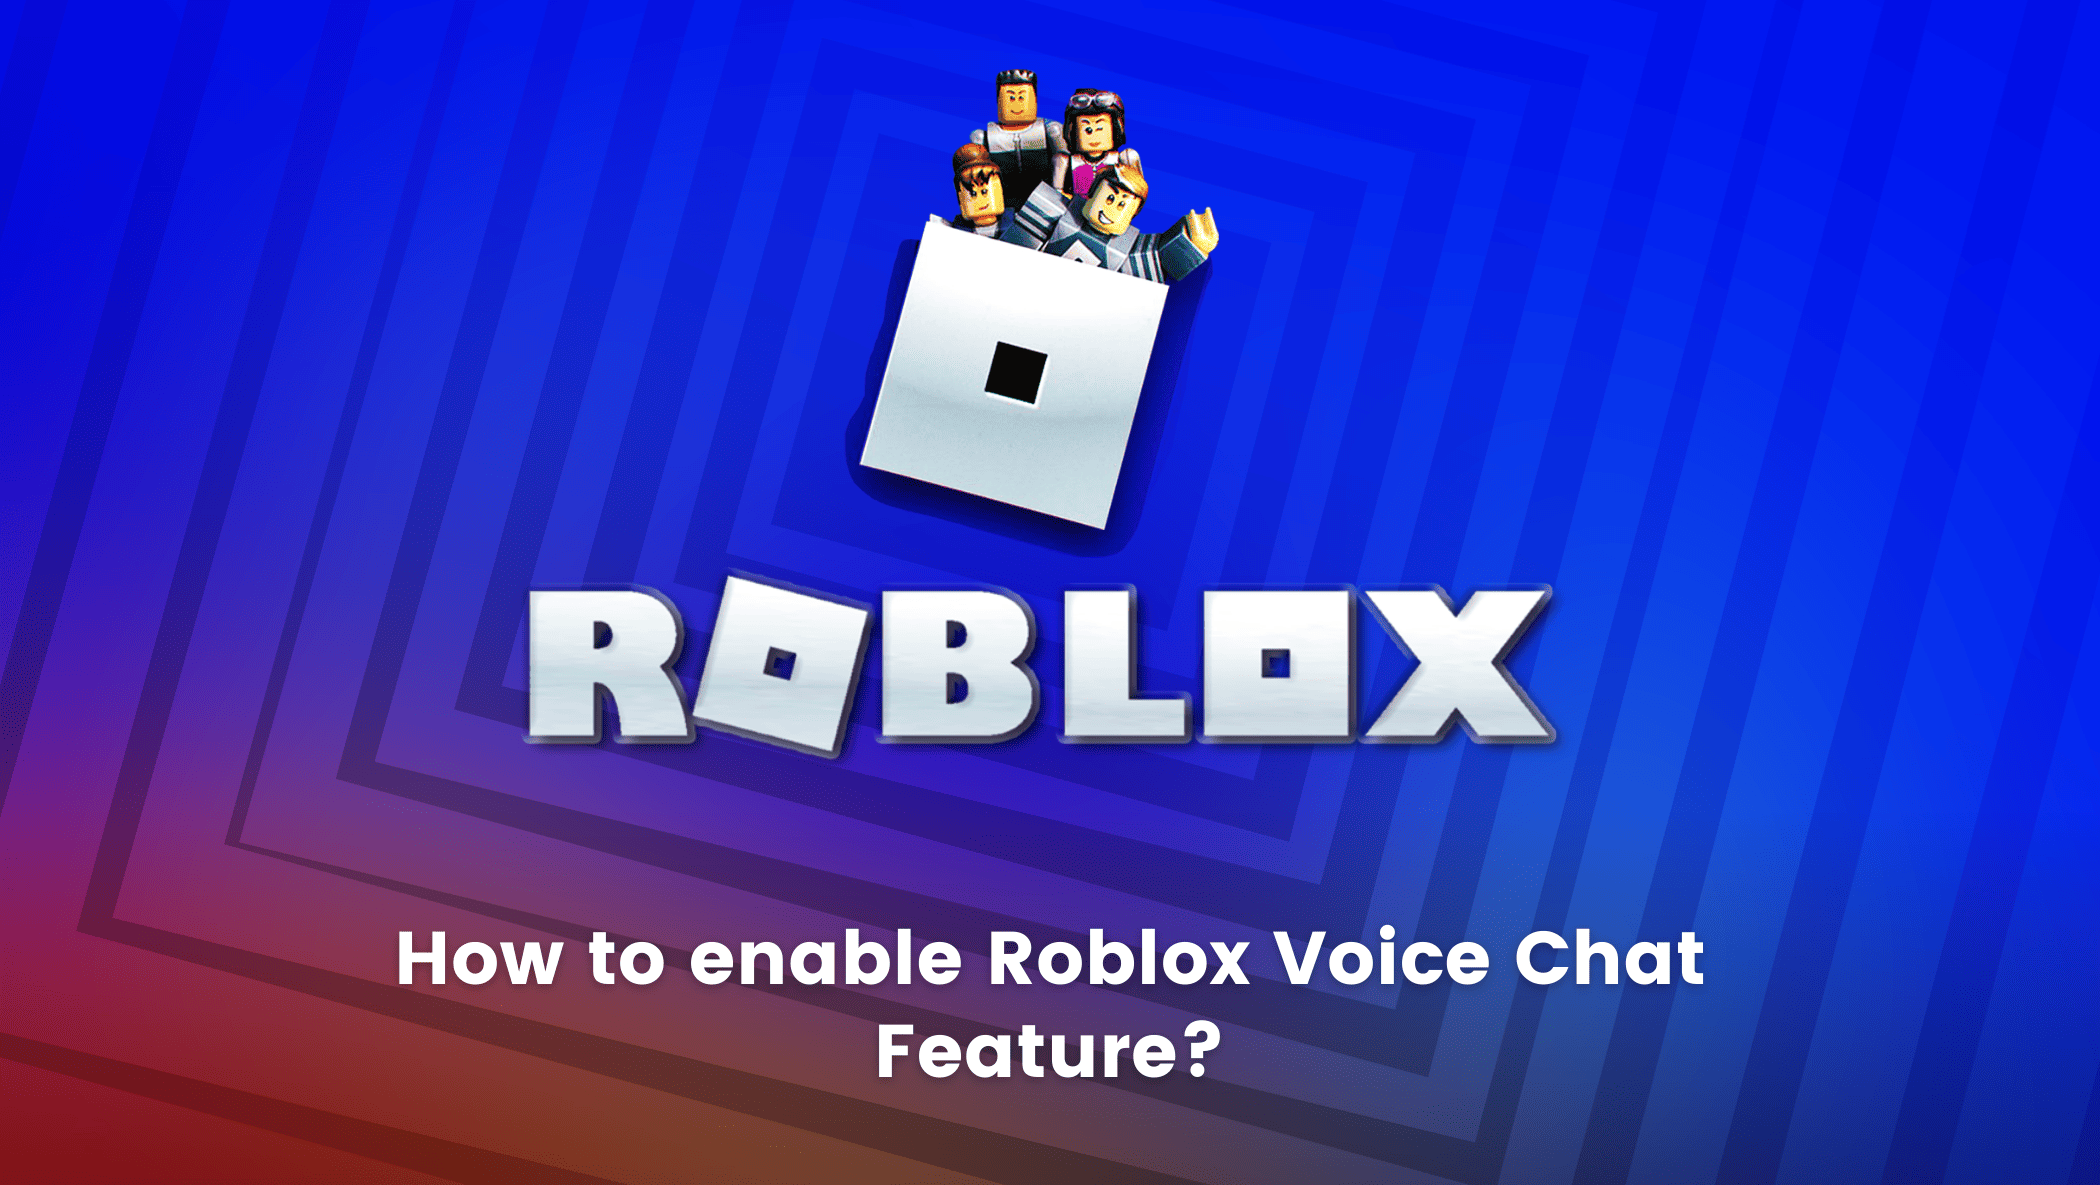 How to enable Roblox Voice Chat Feature